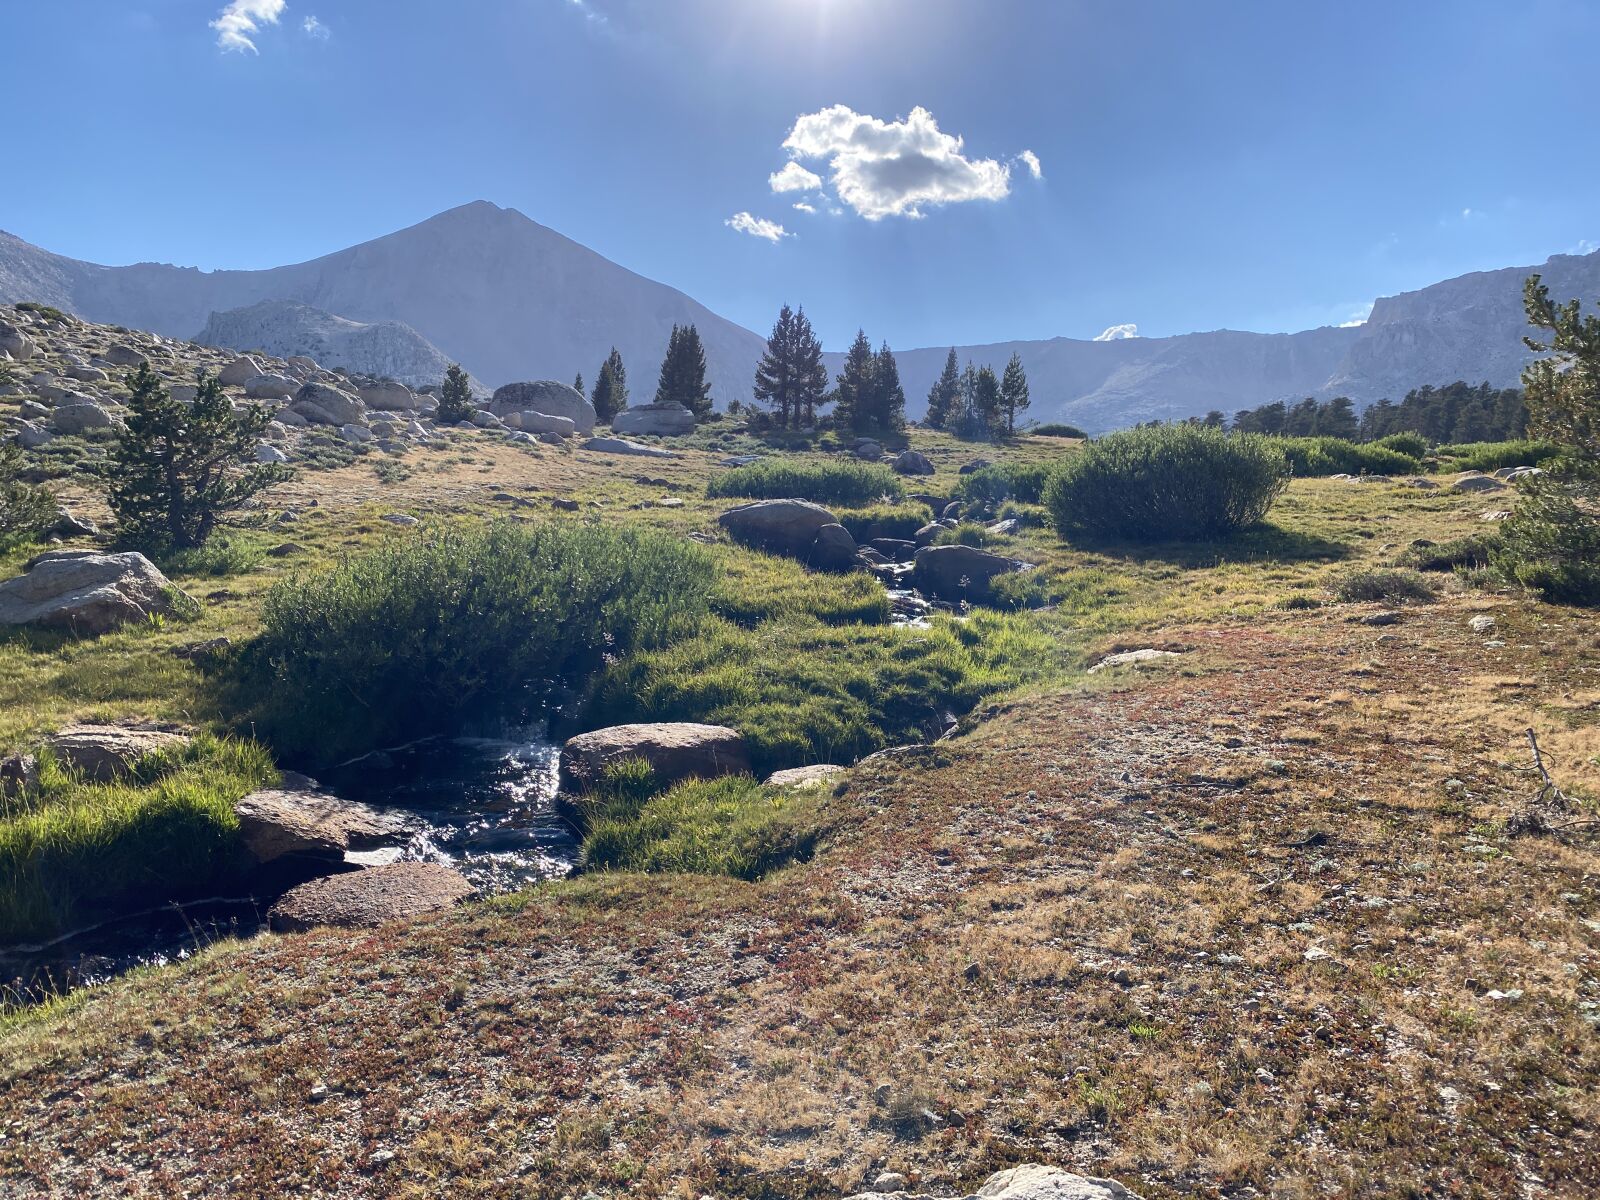 Apple iPhone 11 Pro sample photo. Remote wilderness, mountain stream photography